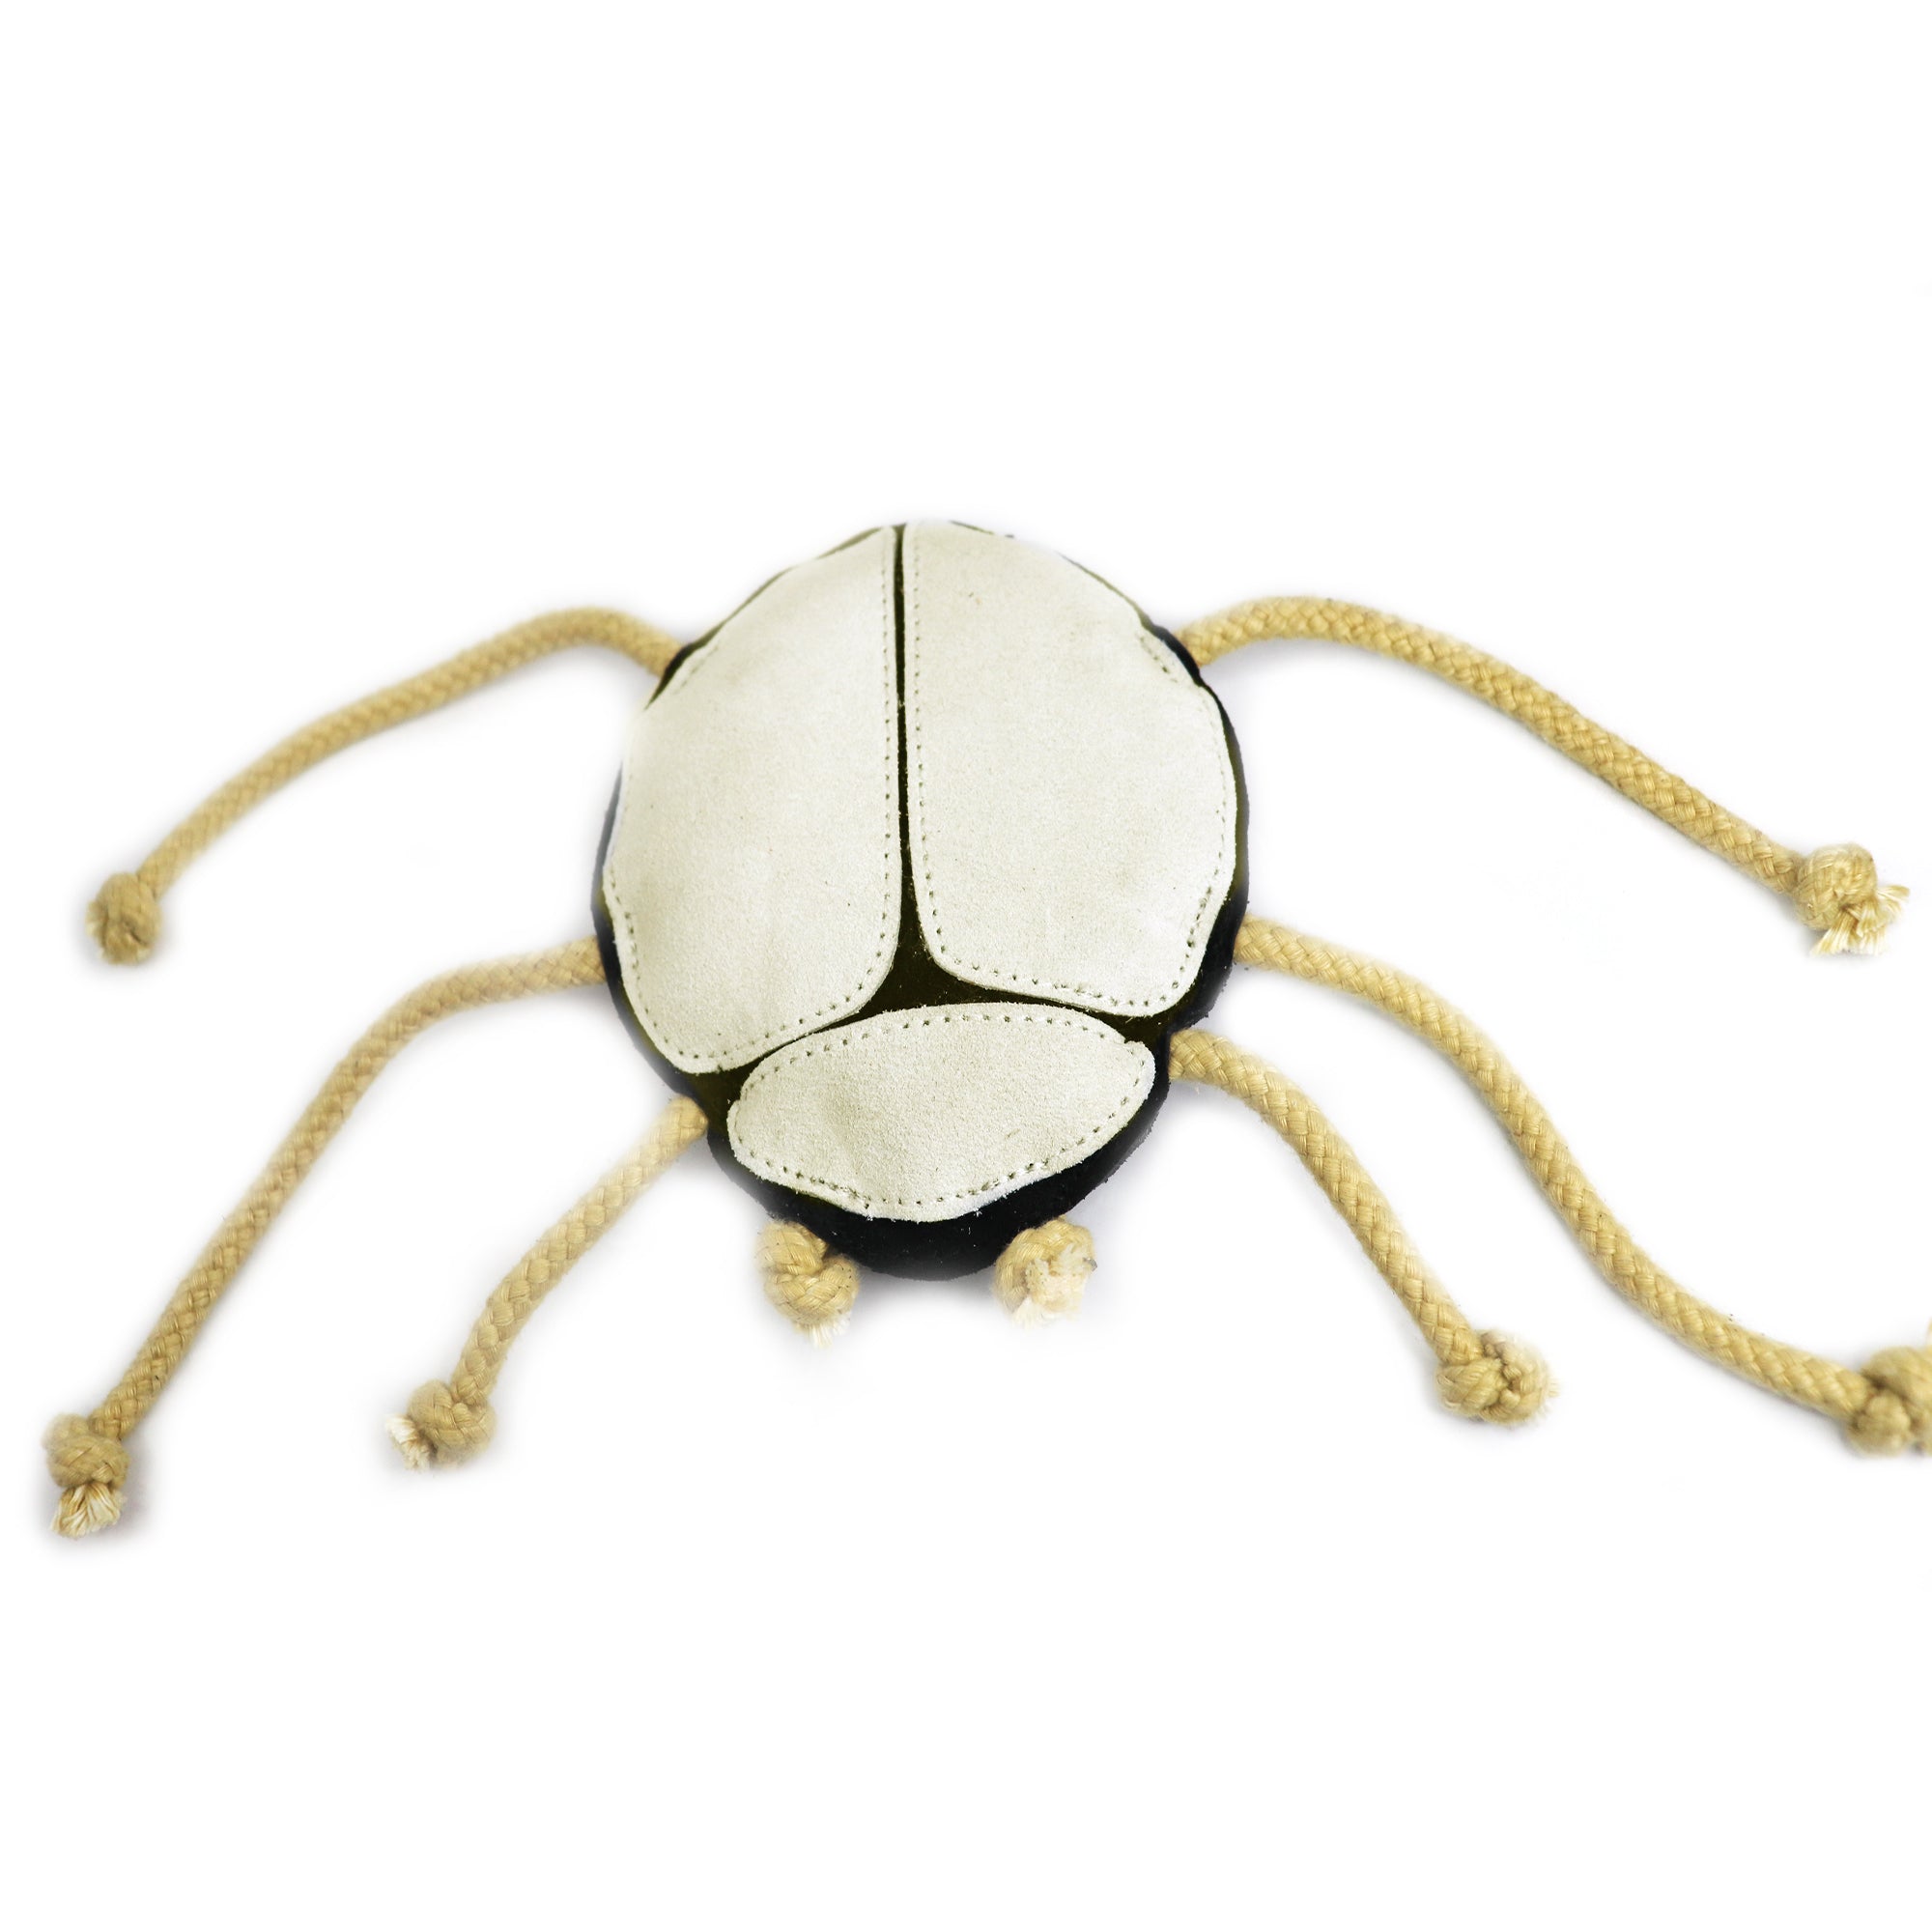 A Betty Beetle Chew Toy by Georgie Paws, with the appearance of a spider, featuring a white and black buffalo suede body and eight tan hand-knotted rope legs with knotted ends, isolated on a white background.